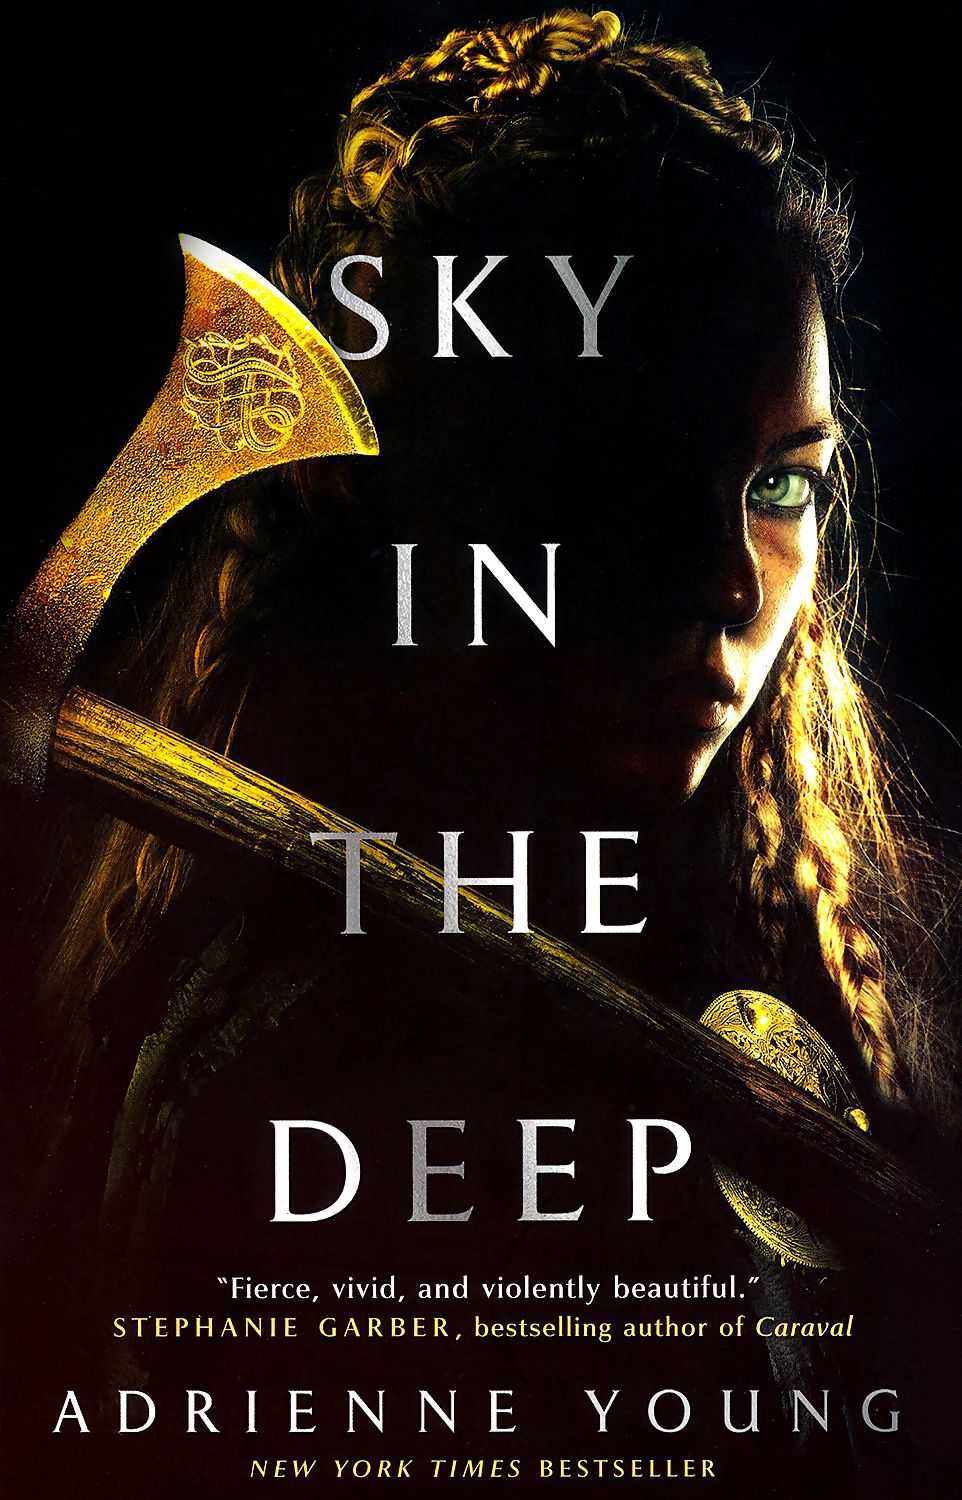 adrienne young sky in the deep series